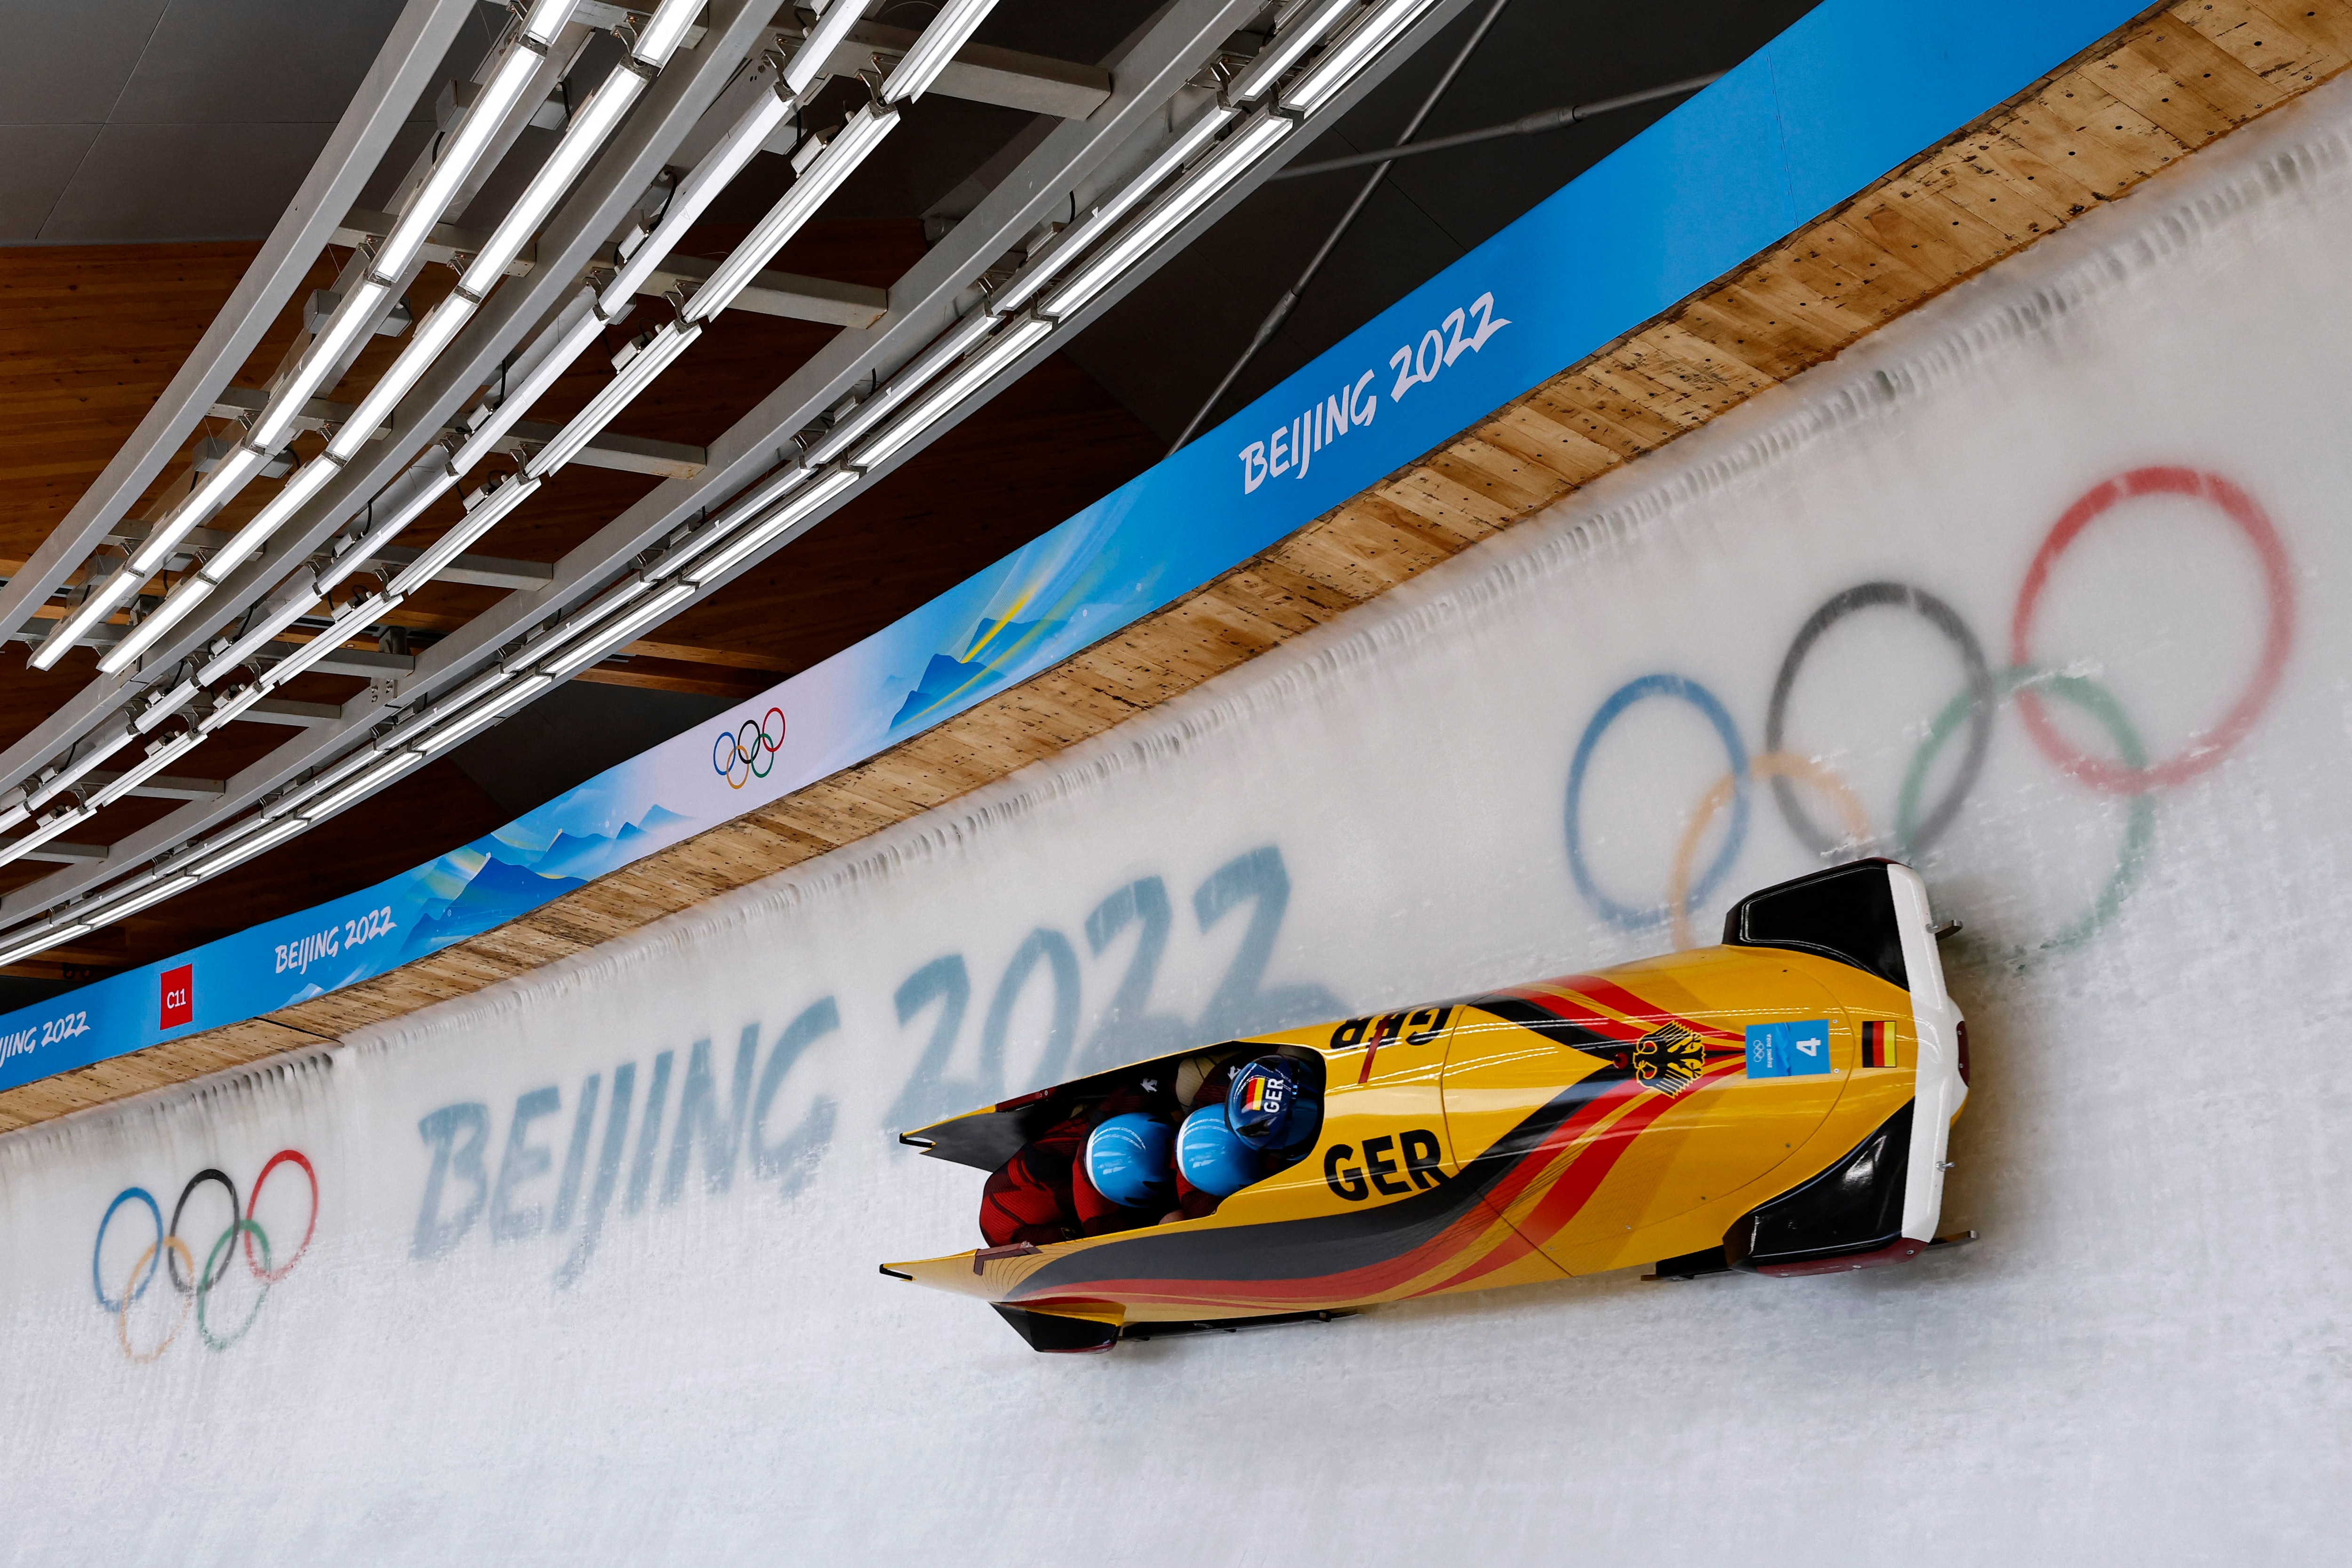 2022 Beijing Olympics - Bobsleigh - 4-man Heat 2 - National Sliding Centre, Beijing, China - February 19, 2022. Francesco Friedrich of Germany, Thorsten Margis of Germany, Candy Bauer of Germany and Alexander Schueller of Germany in action. REUTERS/Thomas Peter